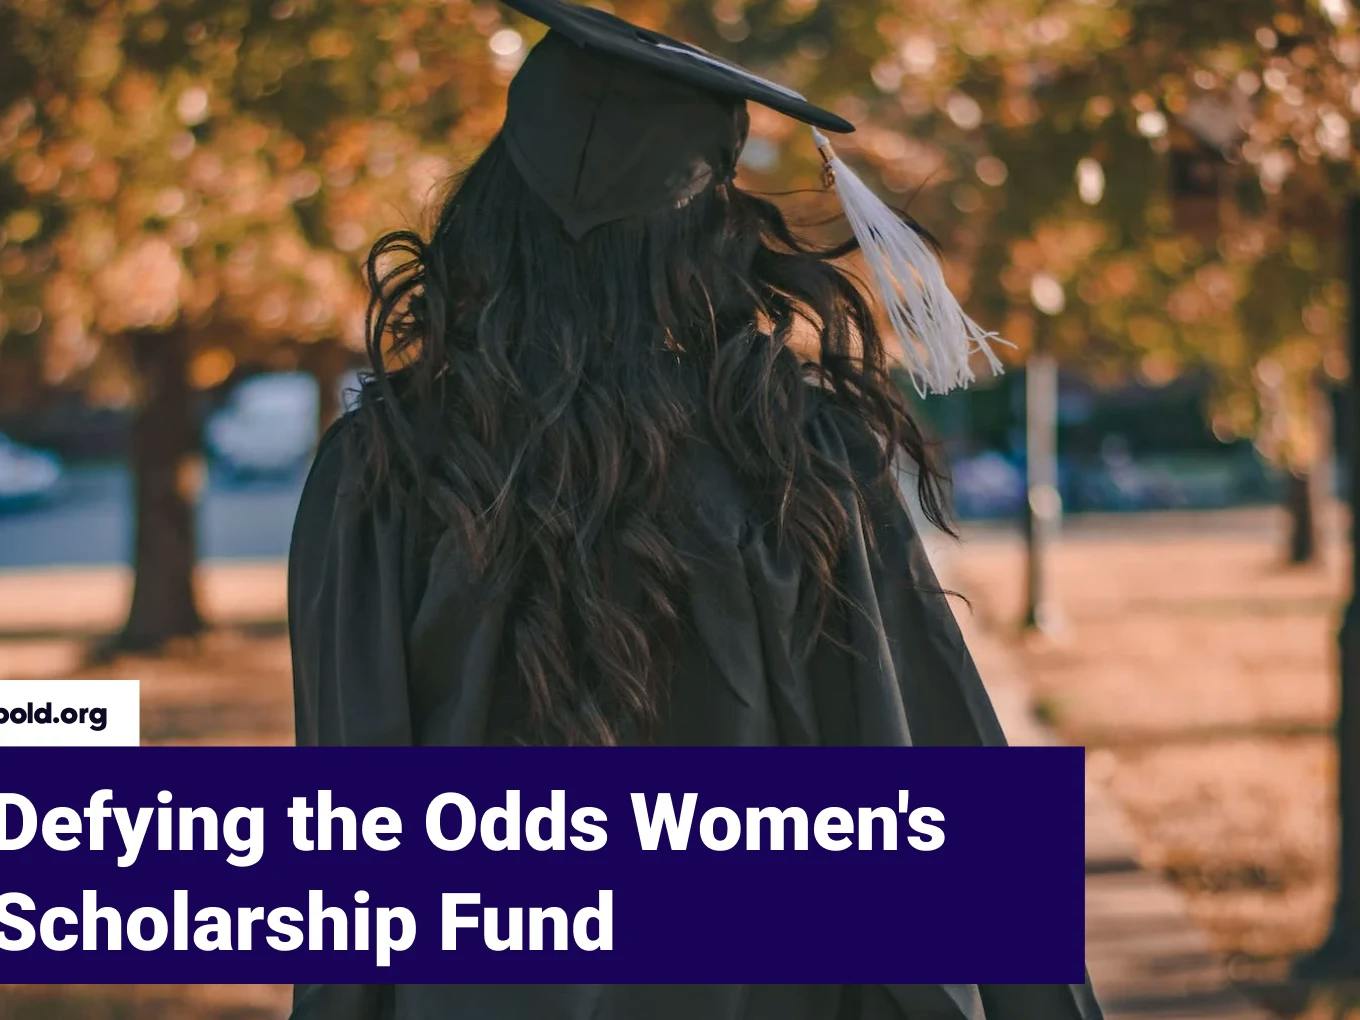 Defying the Odds Women's Scholarship Fund